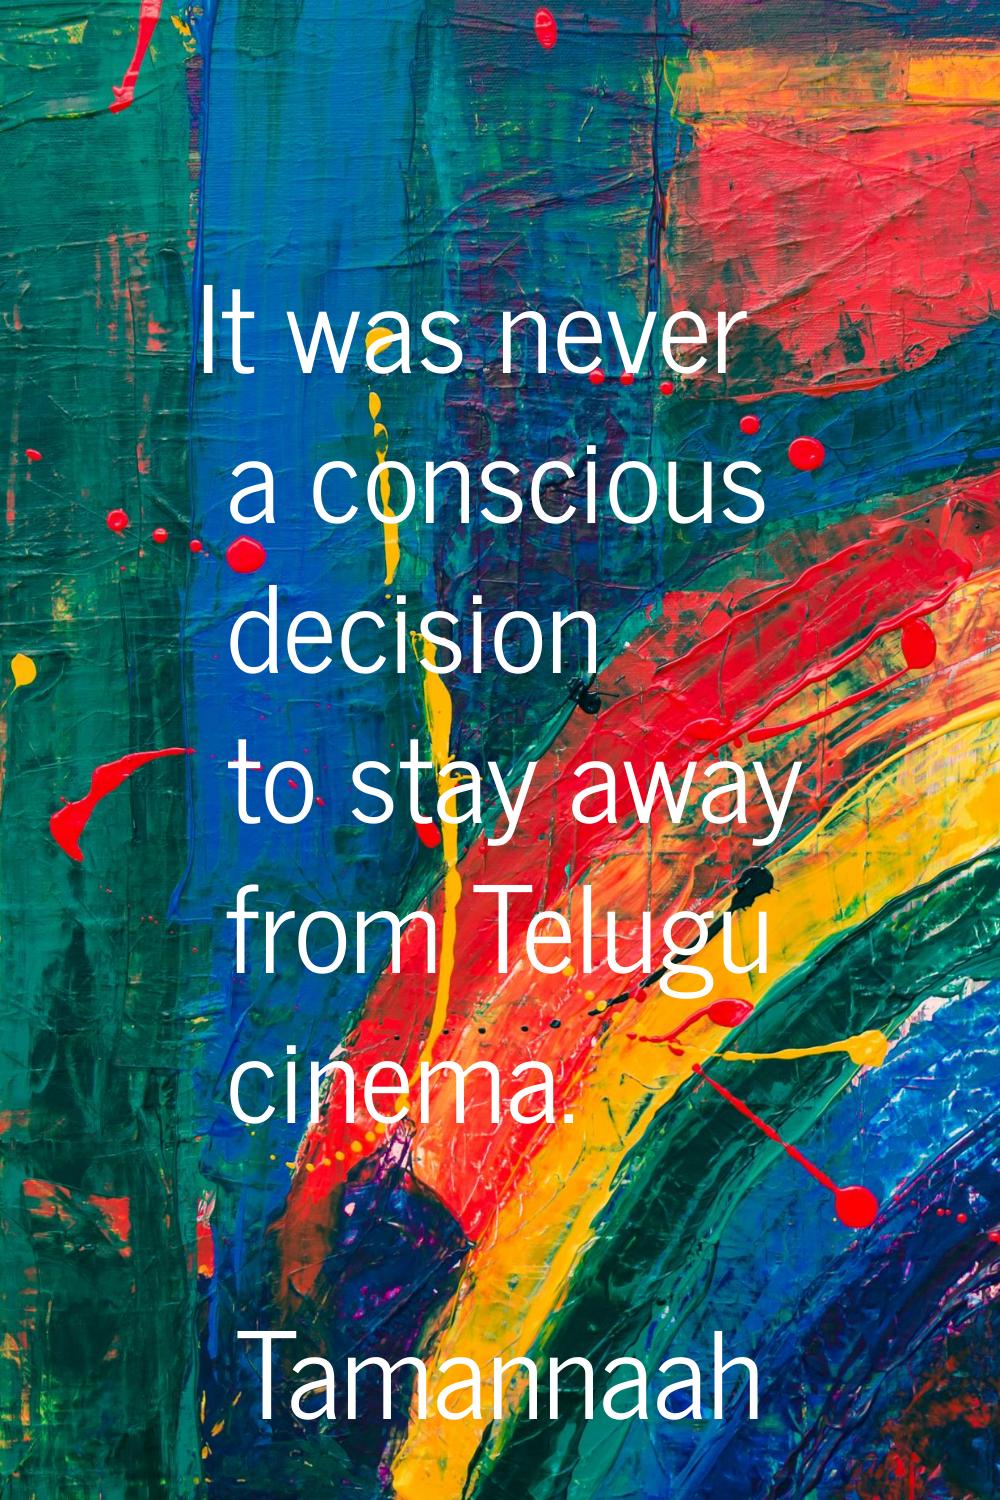 It was never a conscious decision to stay away from Telugu cinema.